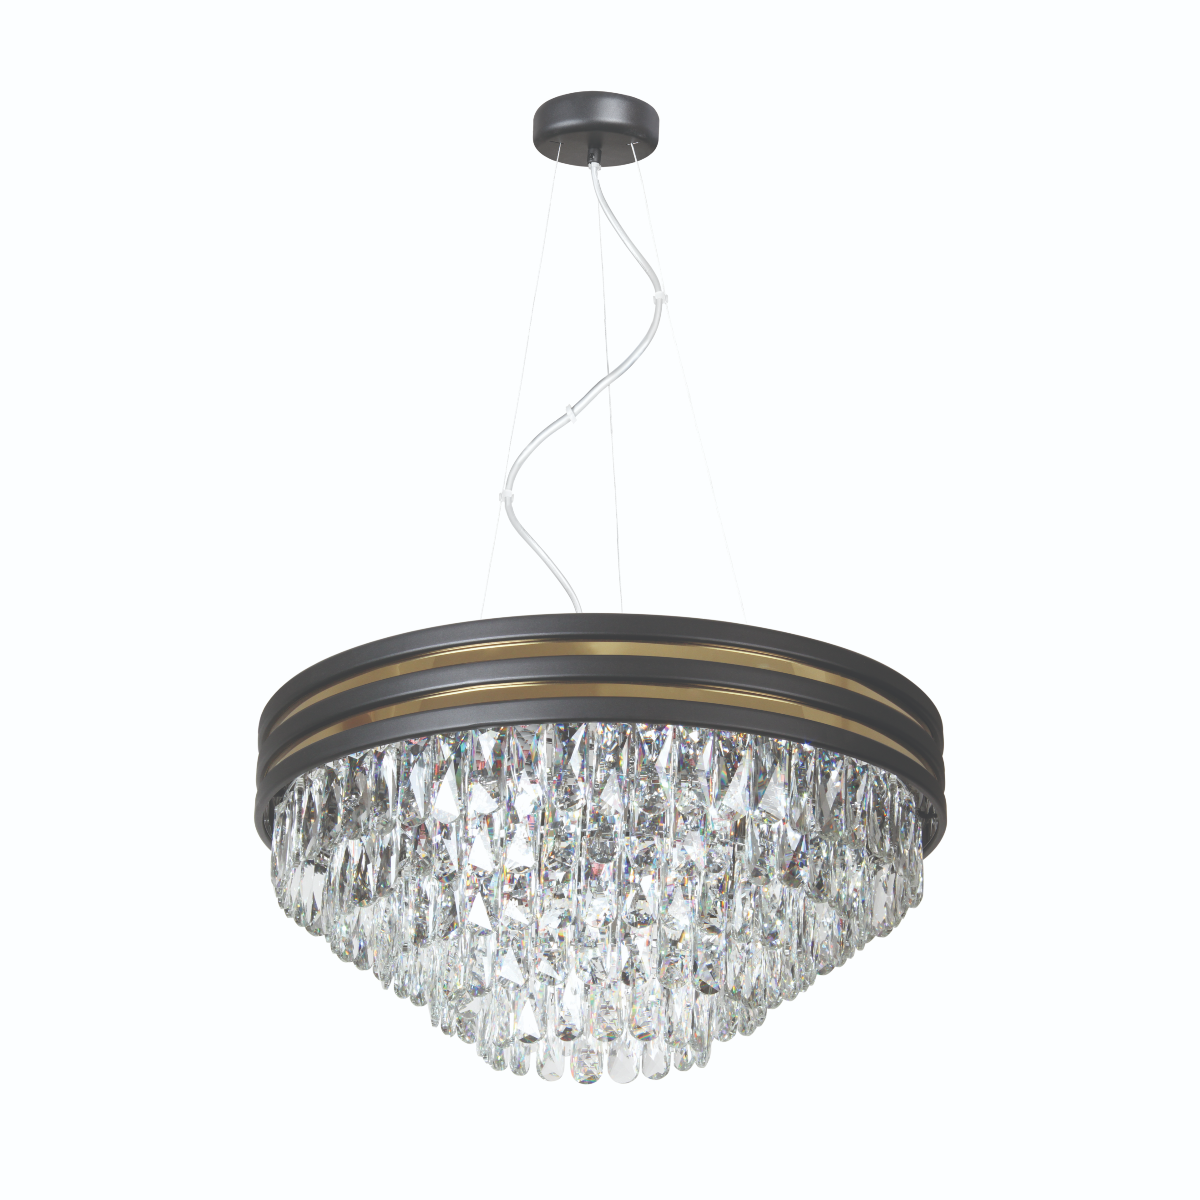 Philips 581965 Naica Suspended Chandelier